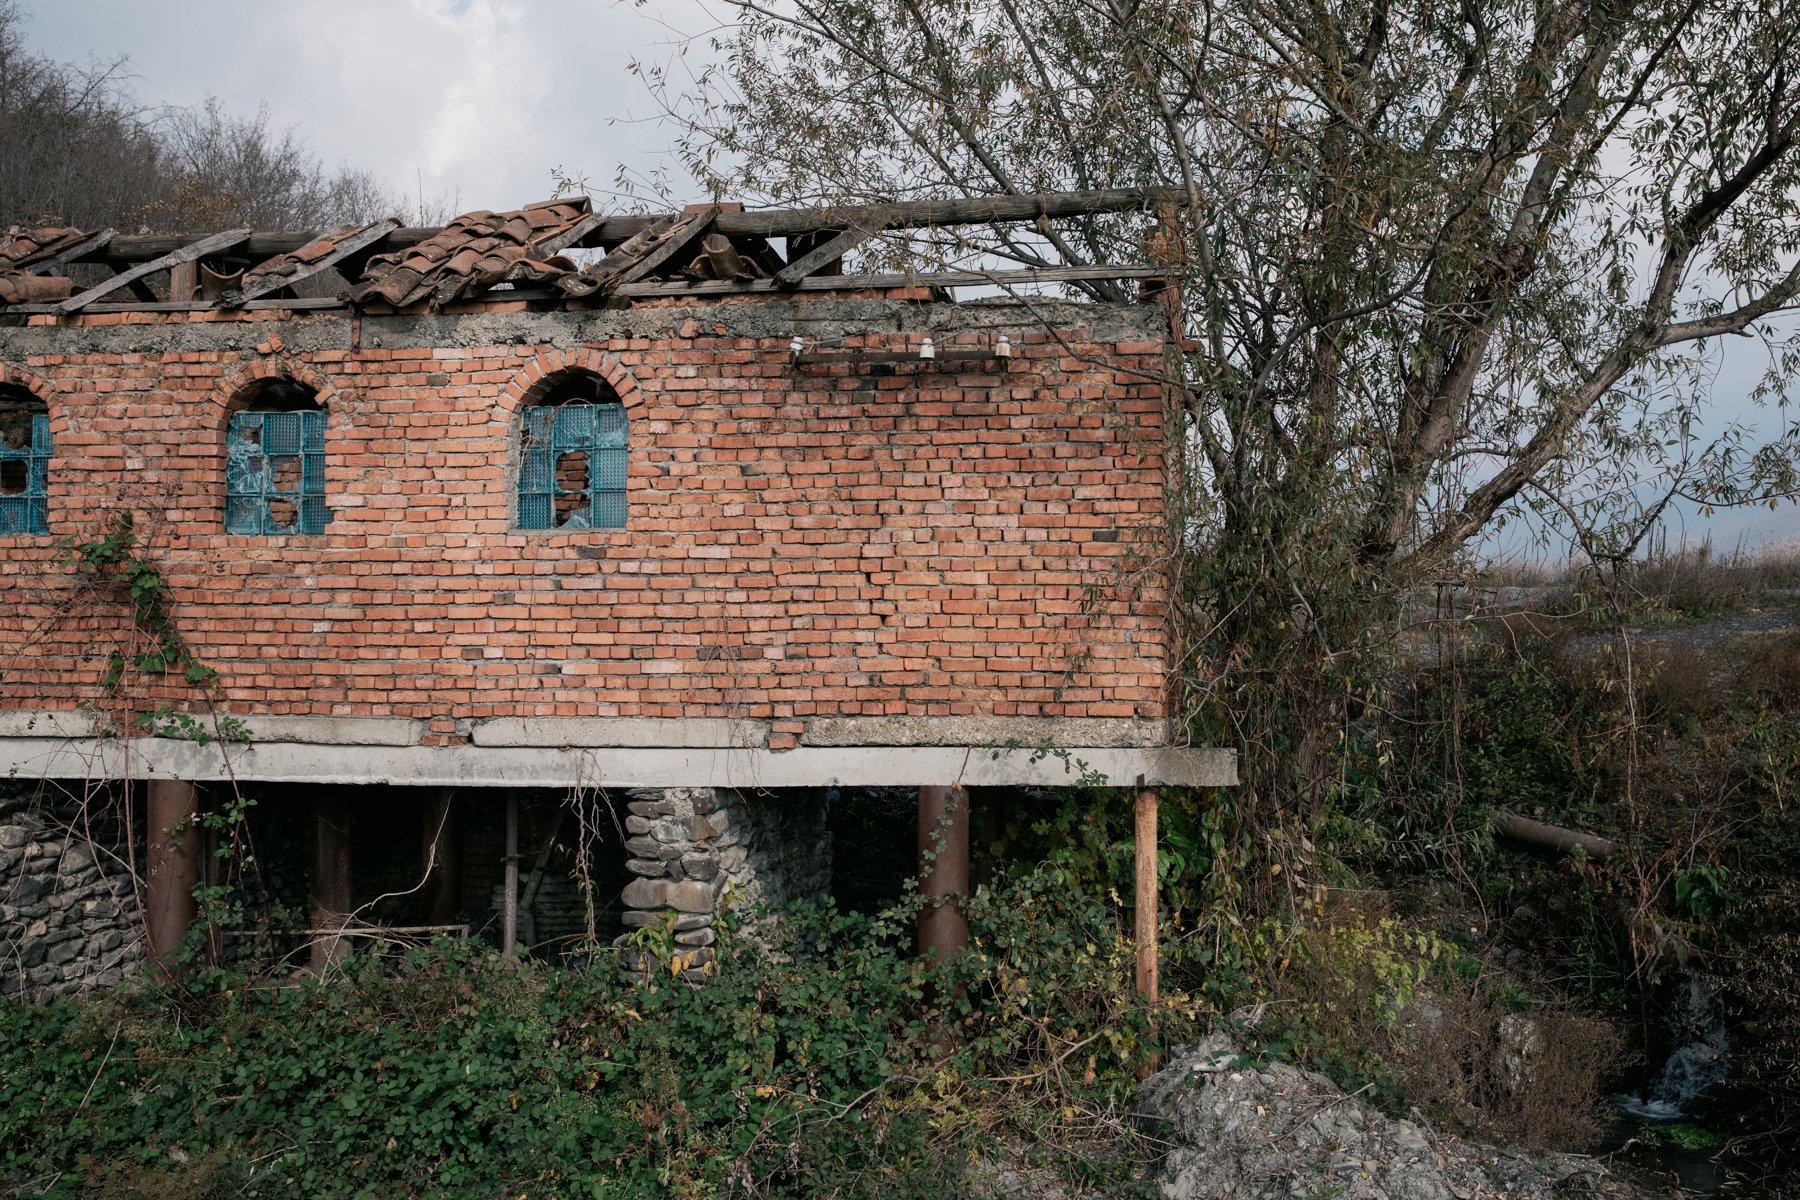  A derelict building on the road to Ilia Lake. 